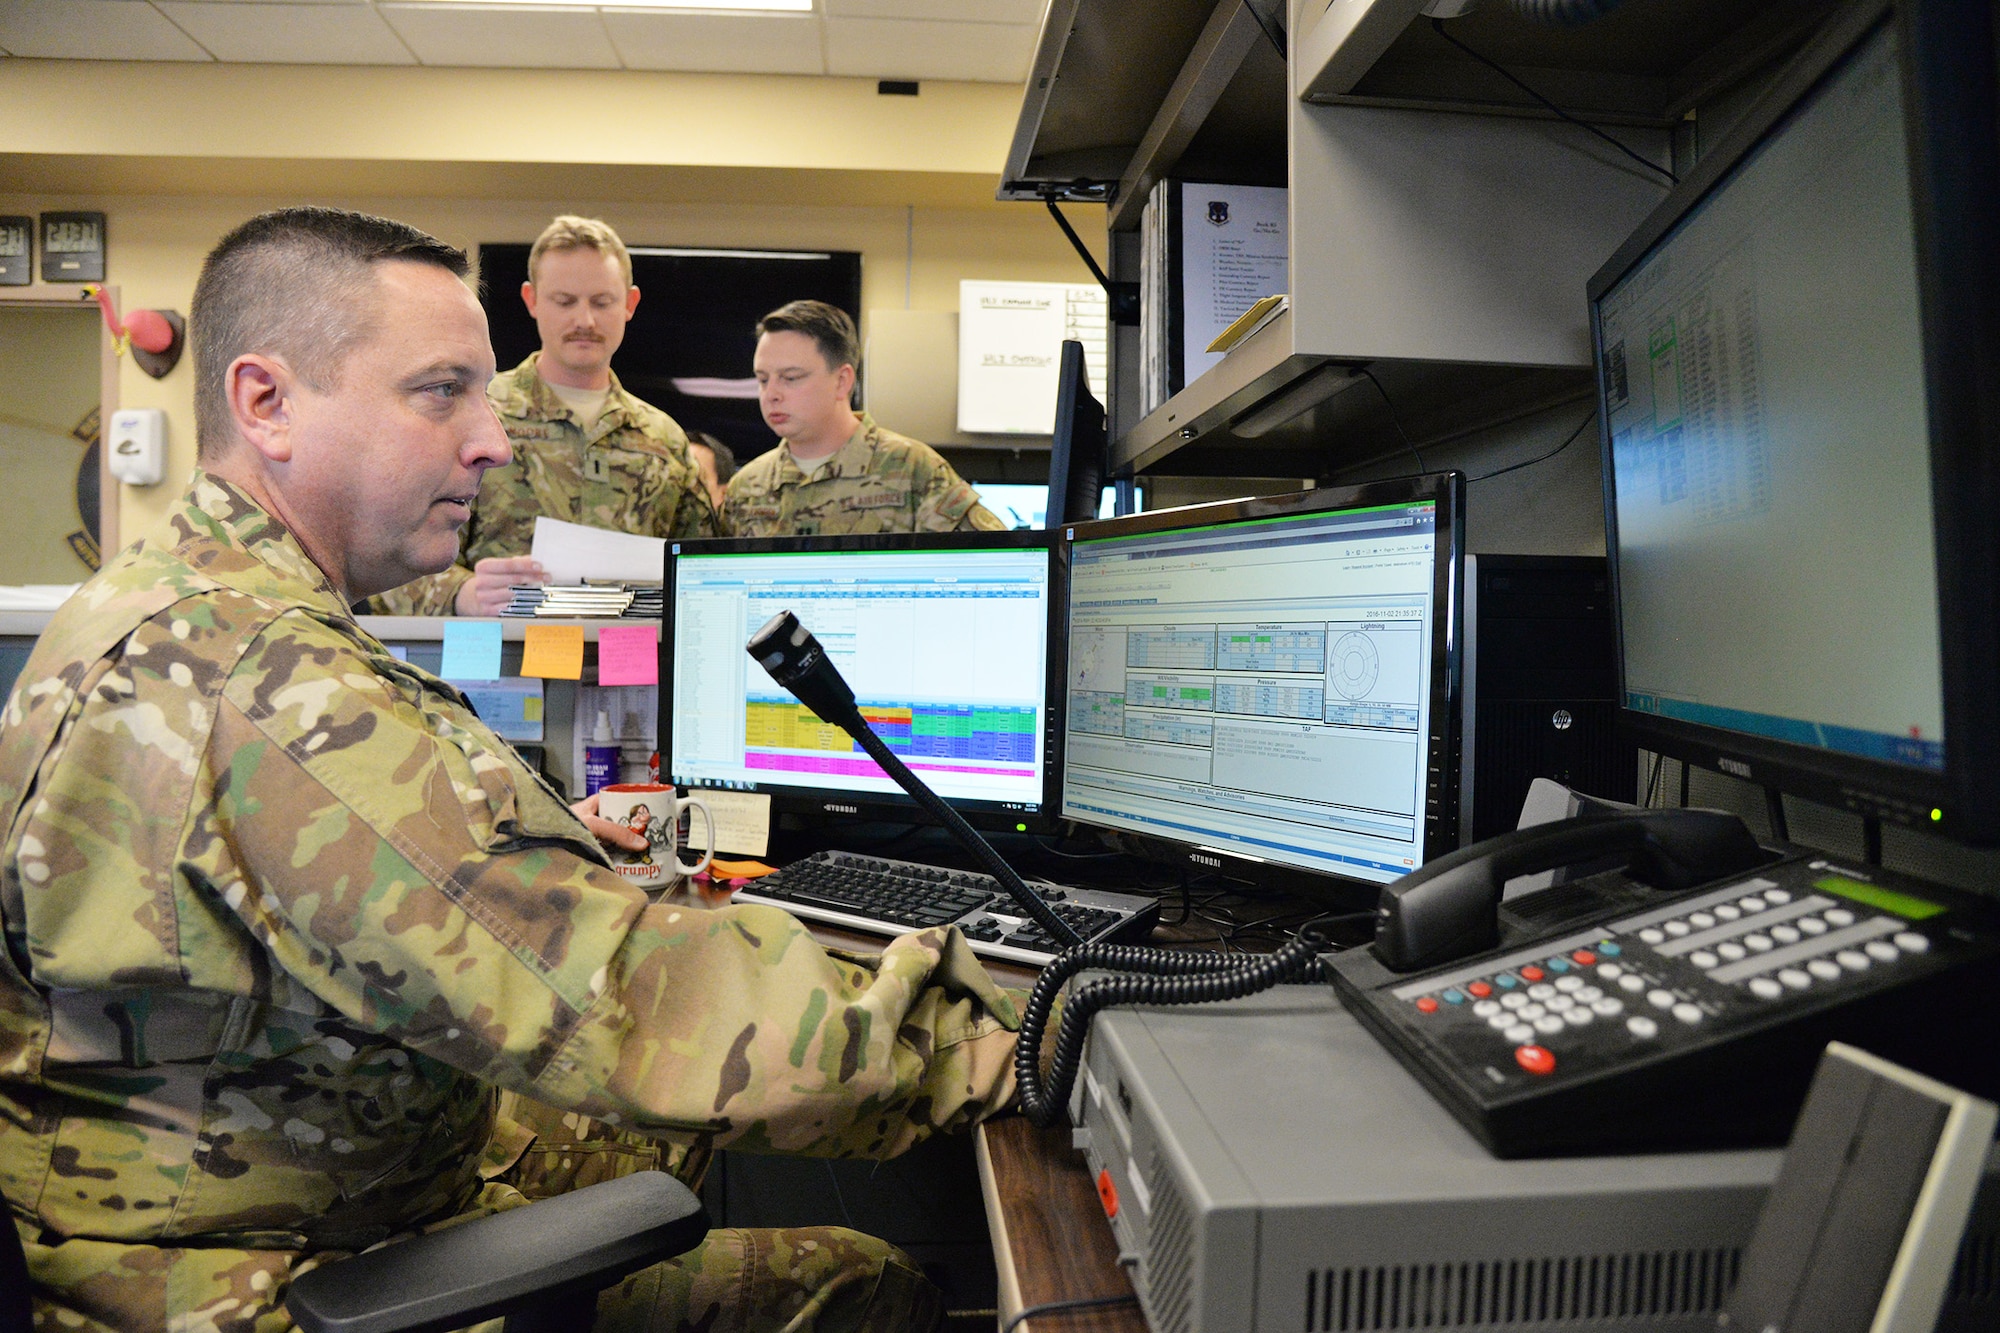 Lt. Col. Kurt Geisen, 40th Helicopter Squadron assistant director of operations, monitors pertinent flying information on a computer Nov. 2, 2016, at Malmstrom Air Force Base, Mont. The 40th HS trains for search and rescue missions in addition to the security mission they support here at the 341st Missile Wing. (U.S. Air Force photo/Airman 1st Class Daniel Brosam)